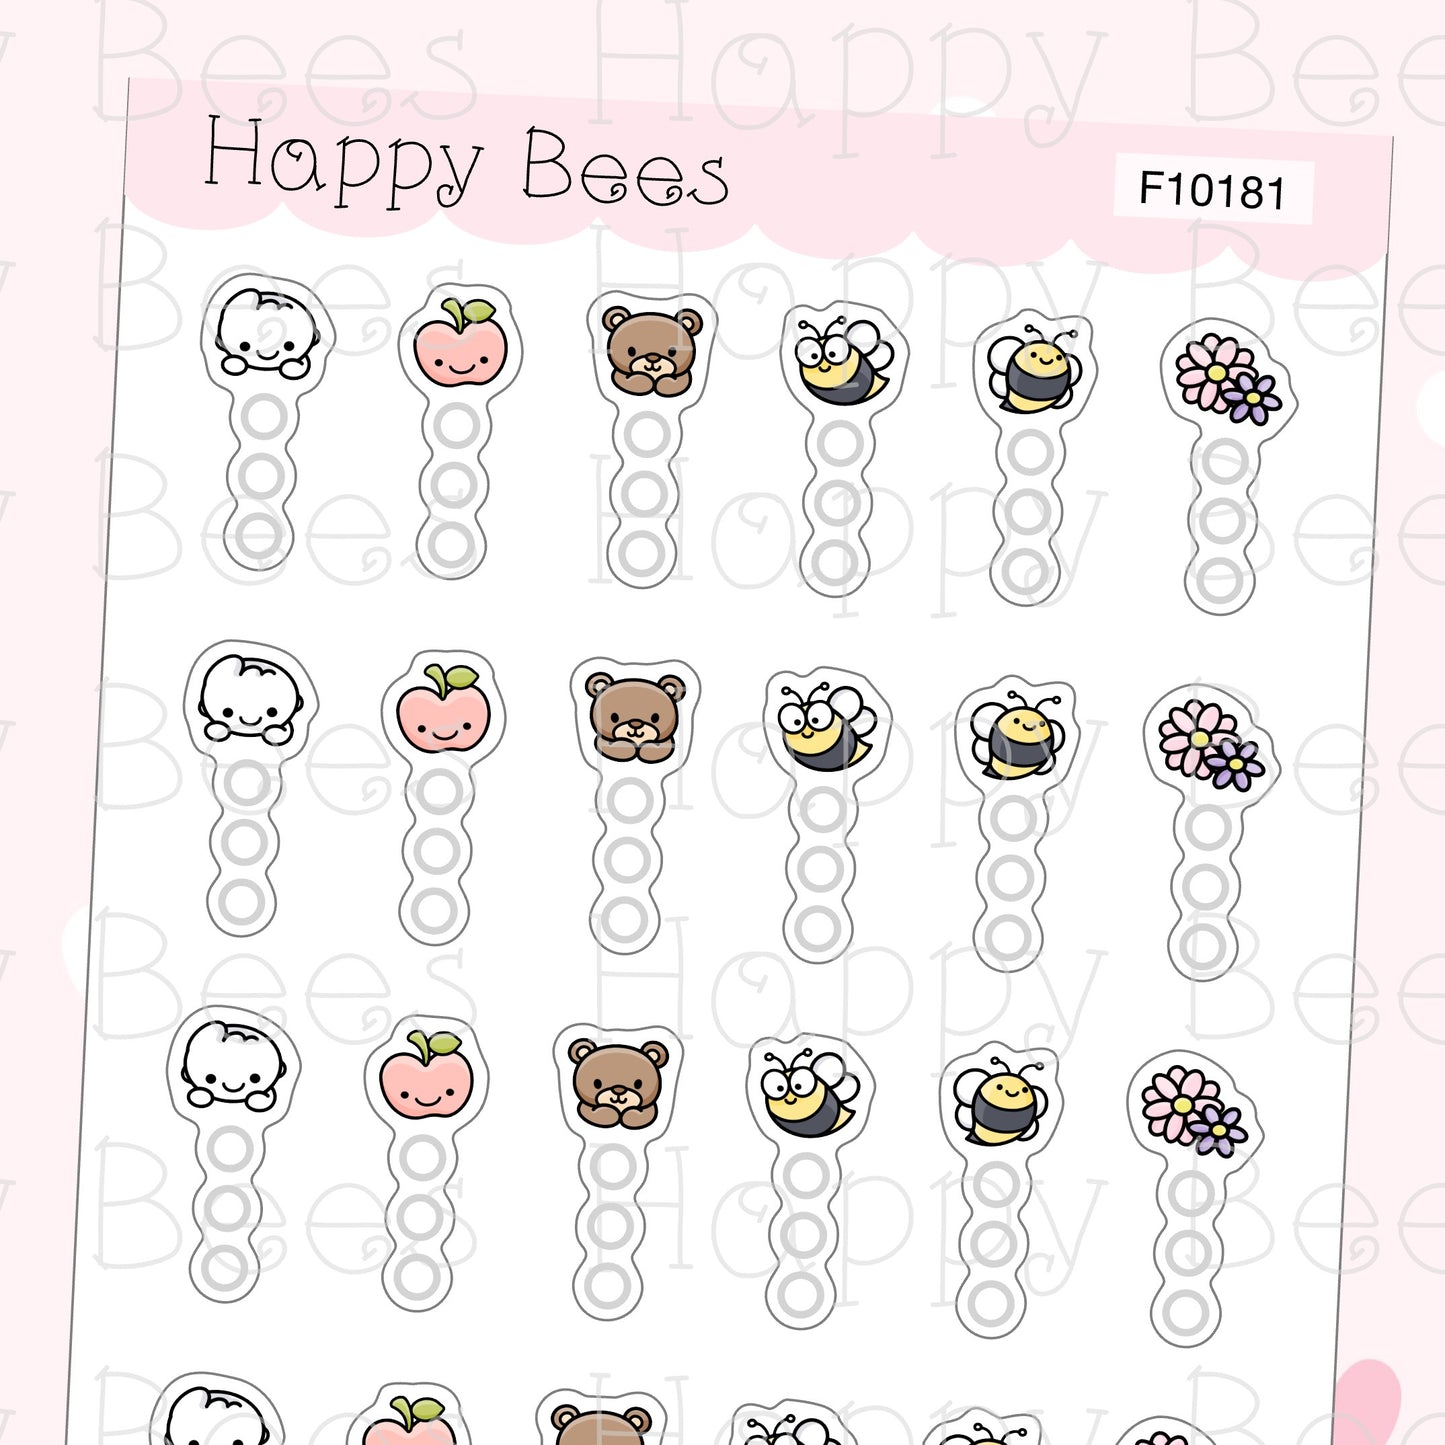 Happy Bees and Friends Checklist - Cute Doodles Hobonichi Weeks Planner Stickers F10181